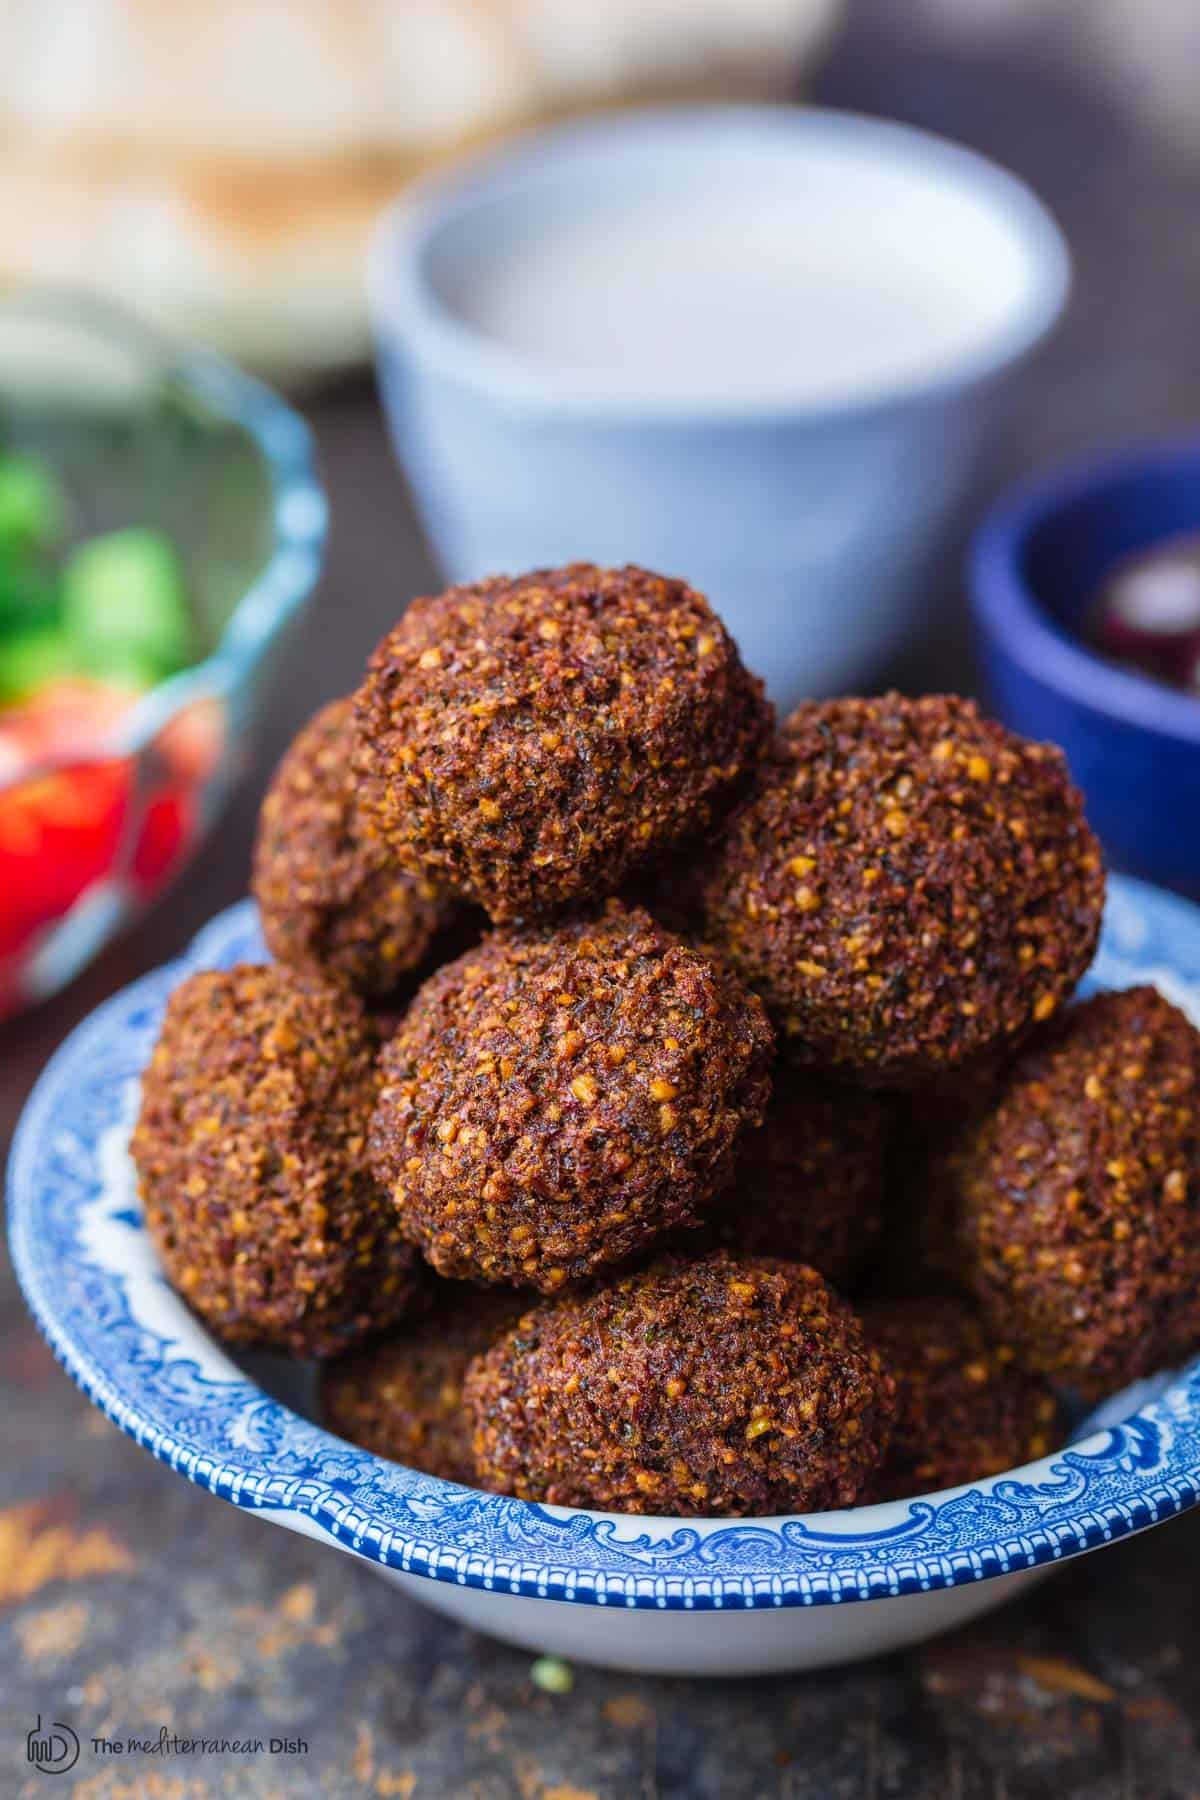 Easy Authentic Falafel Recipe: Step-by-Step